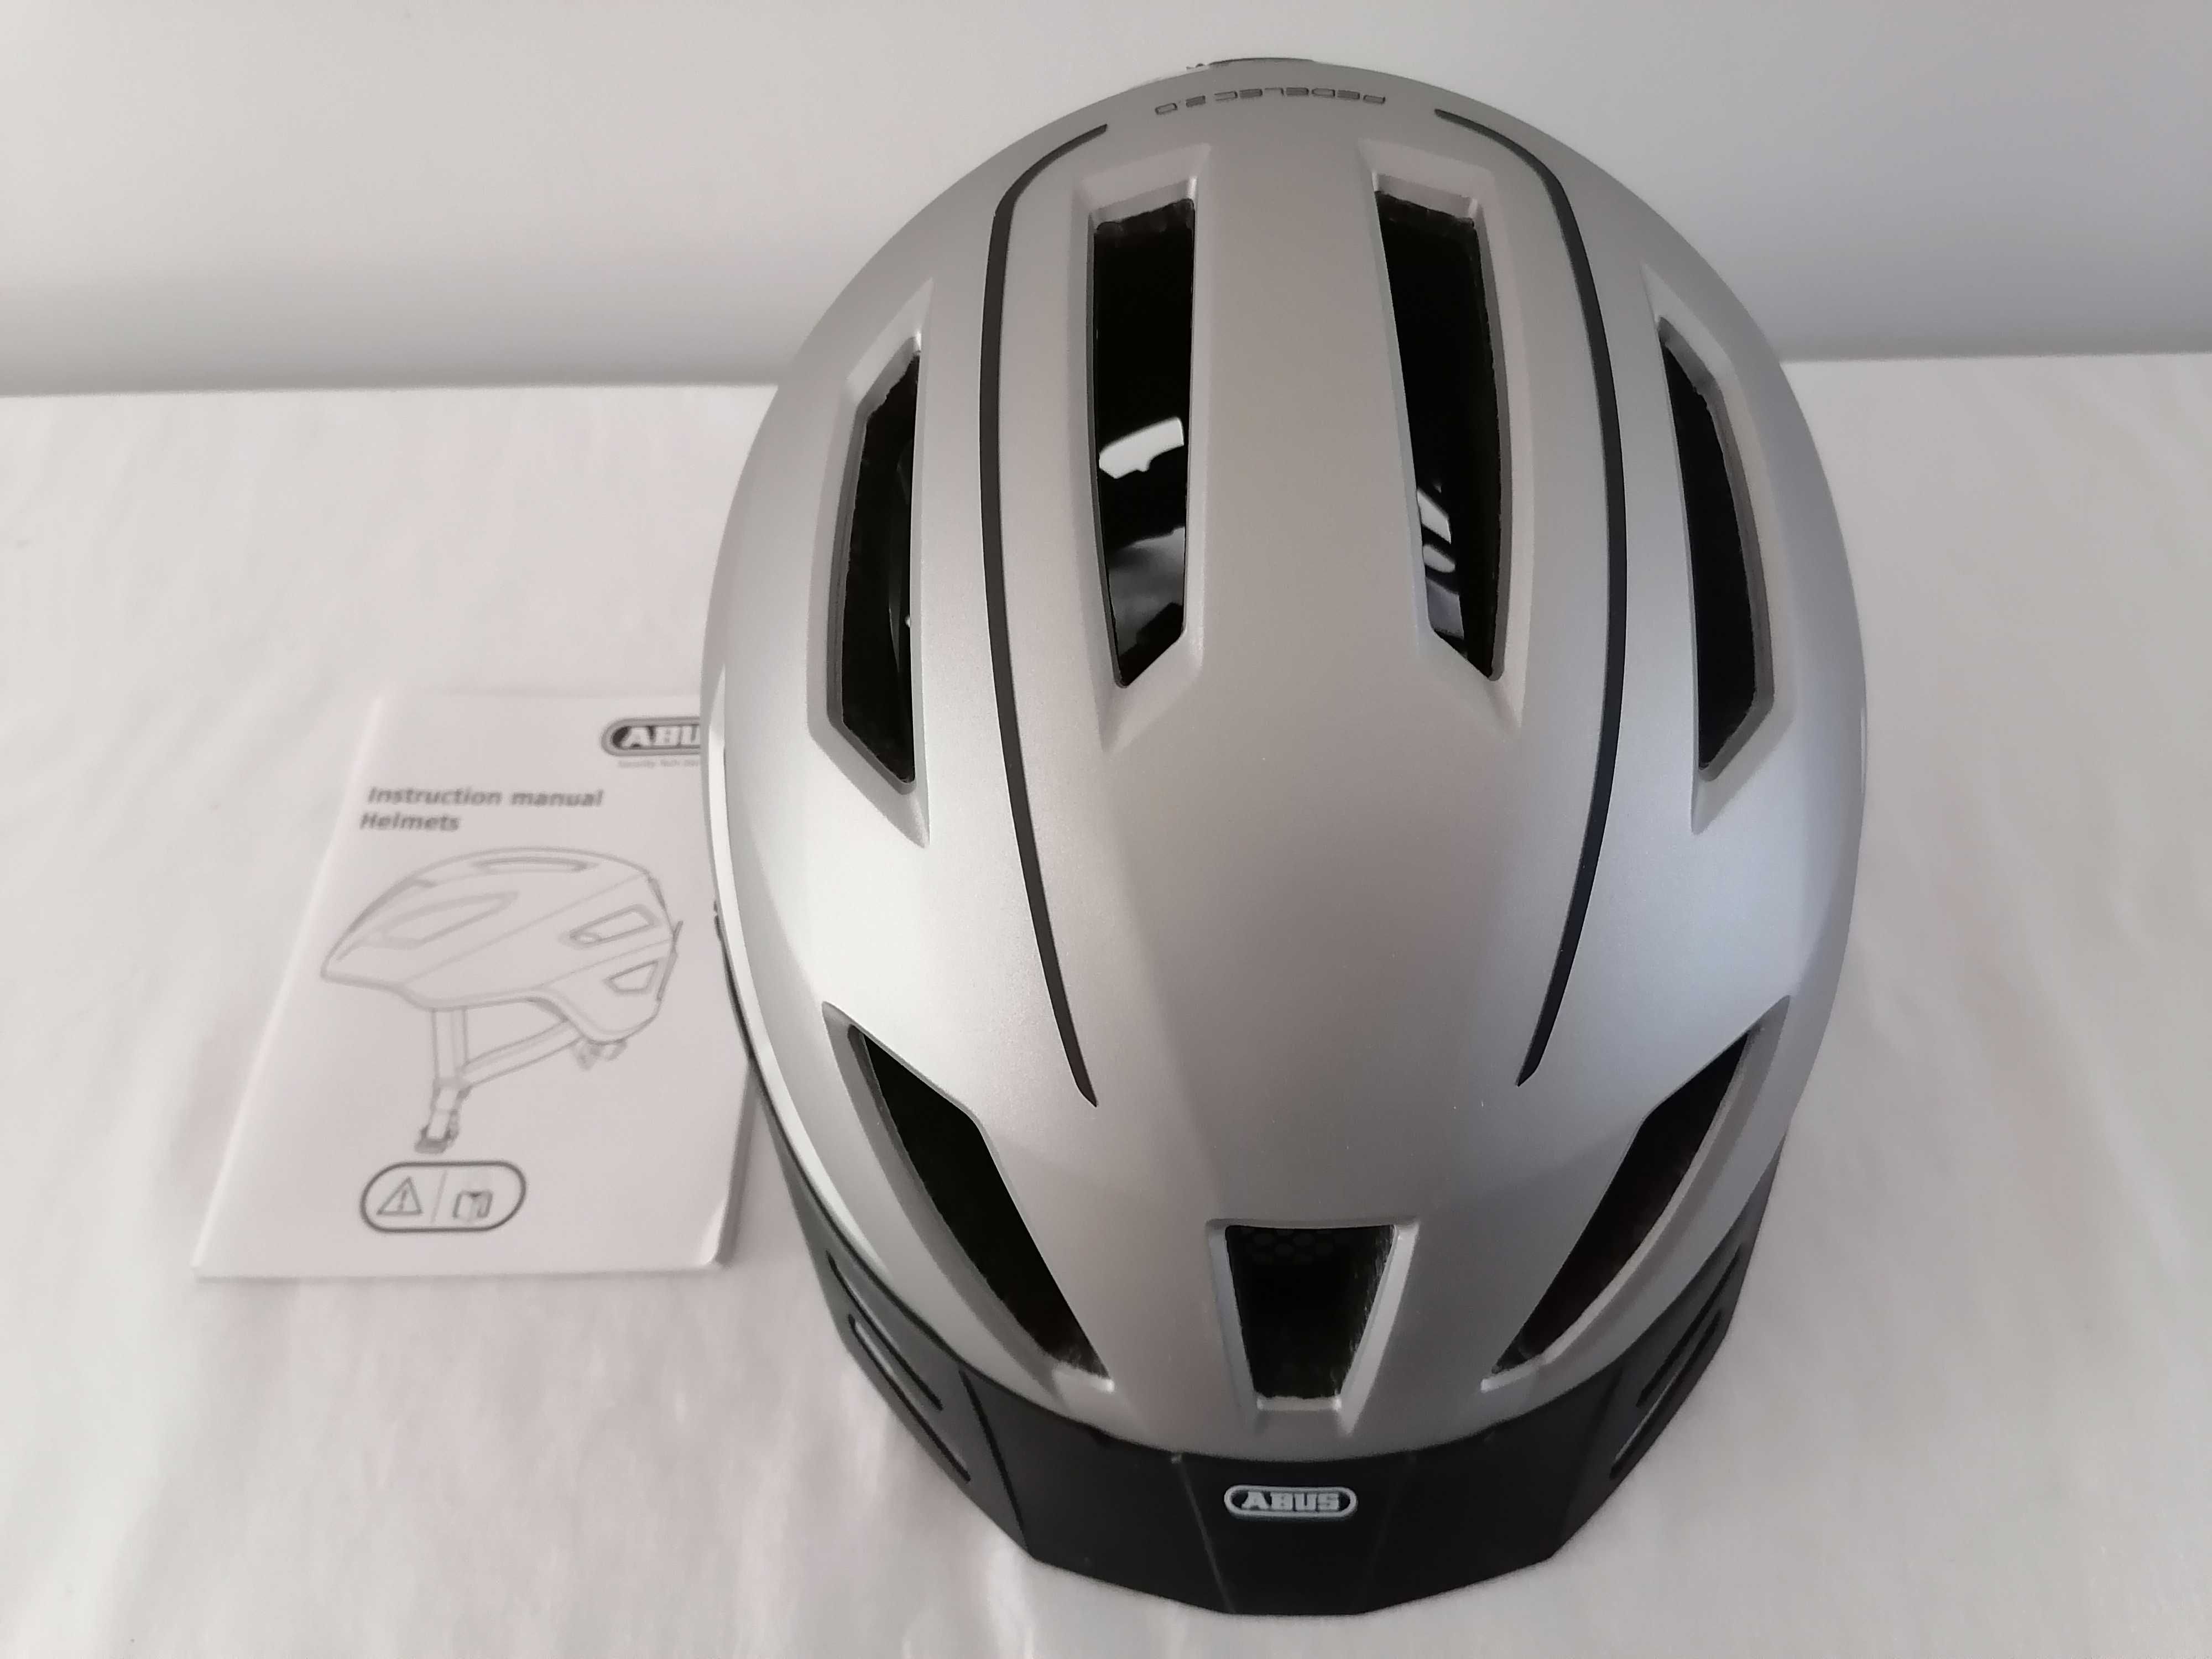 Kask rowerowy Abus Pedelec 2.0 Silver Edition S 51-55cm